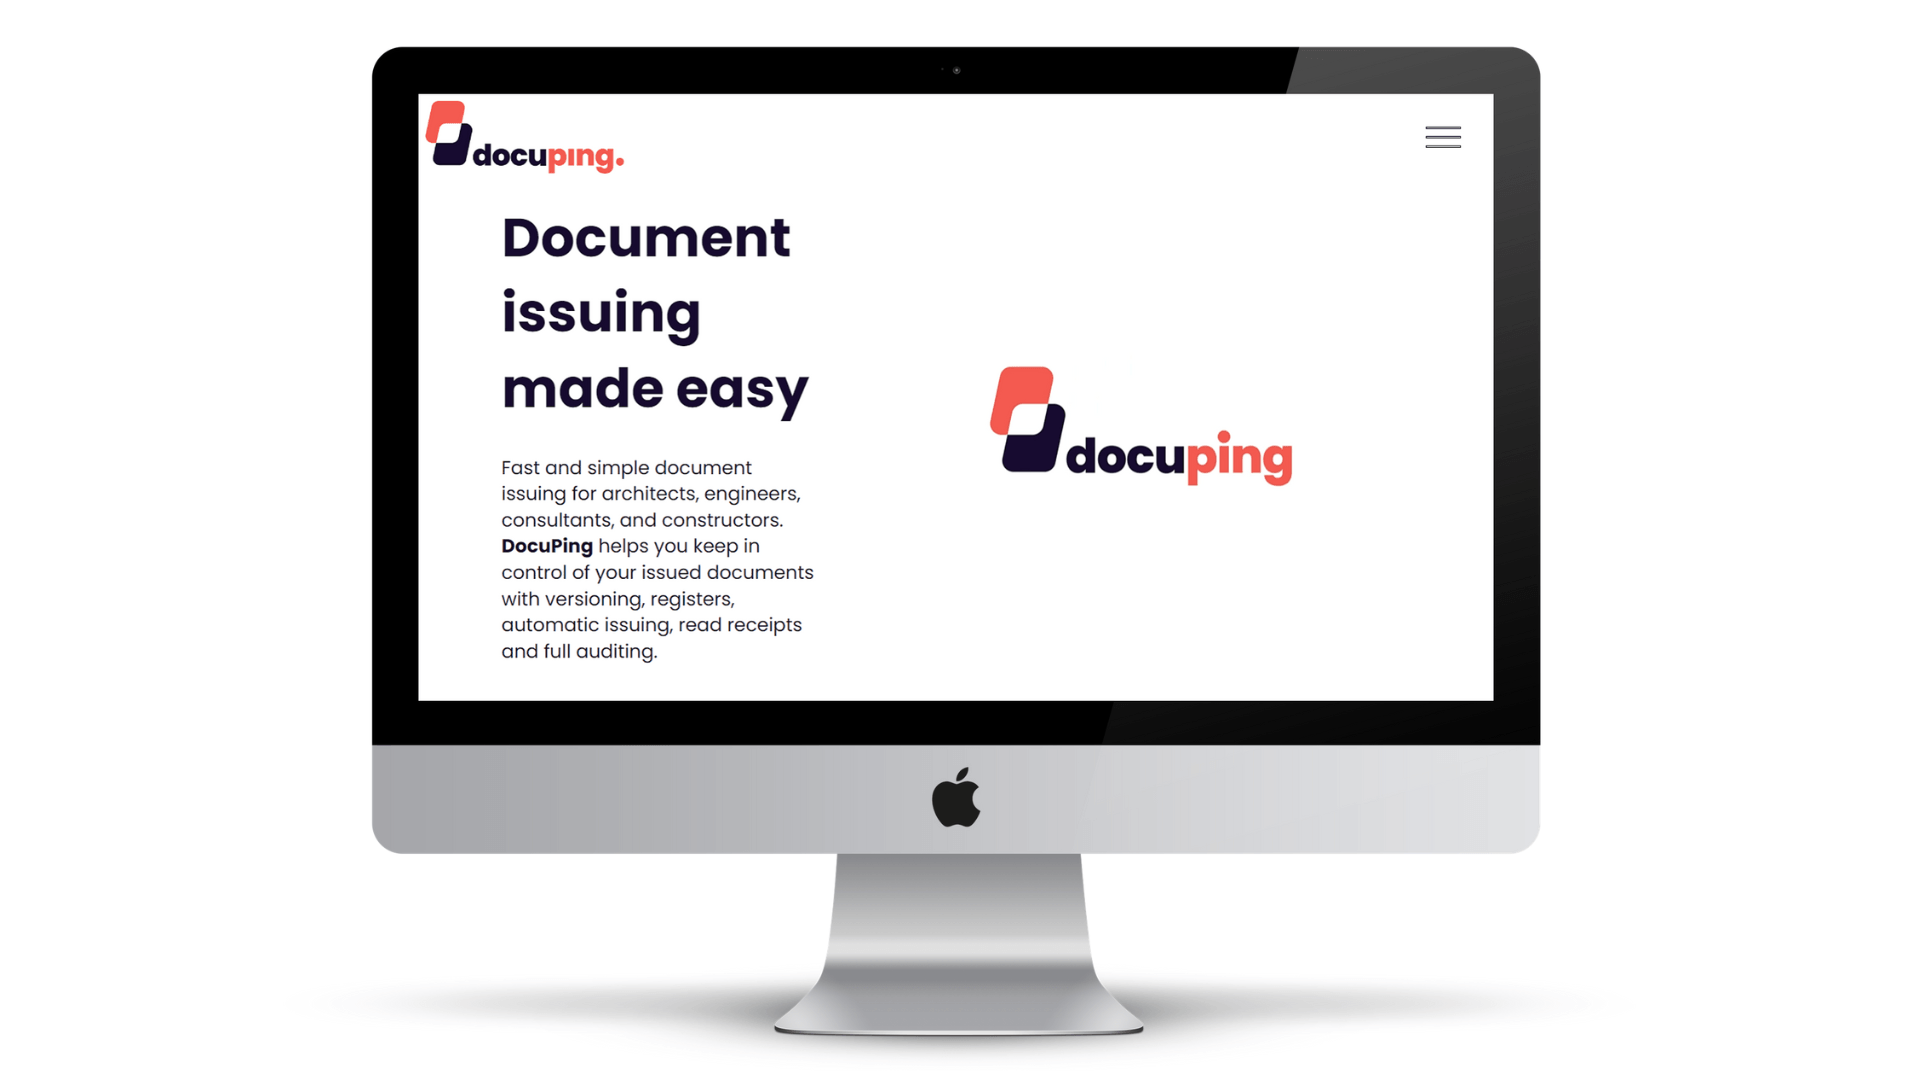 DocuPing website by Digity